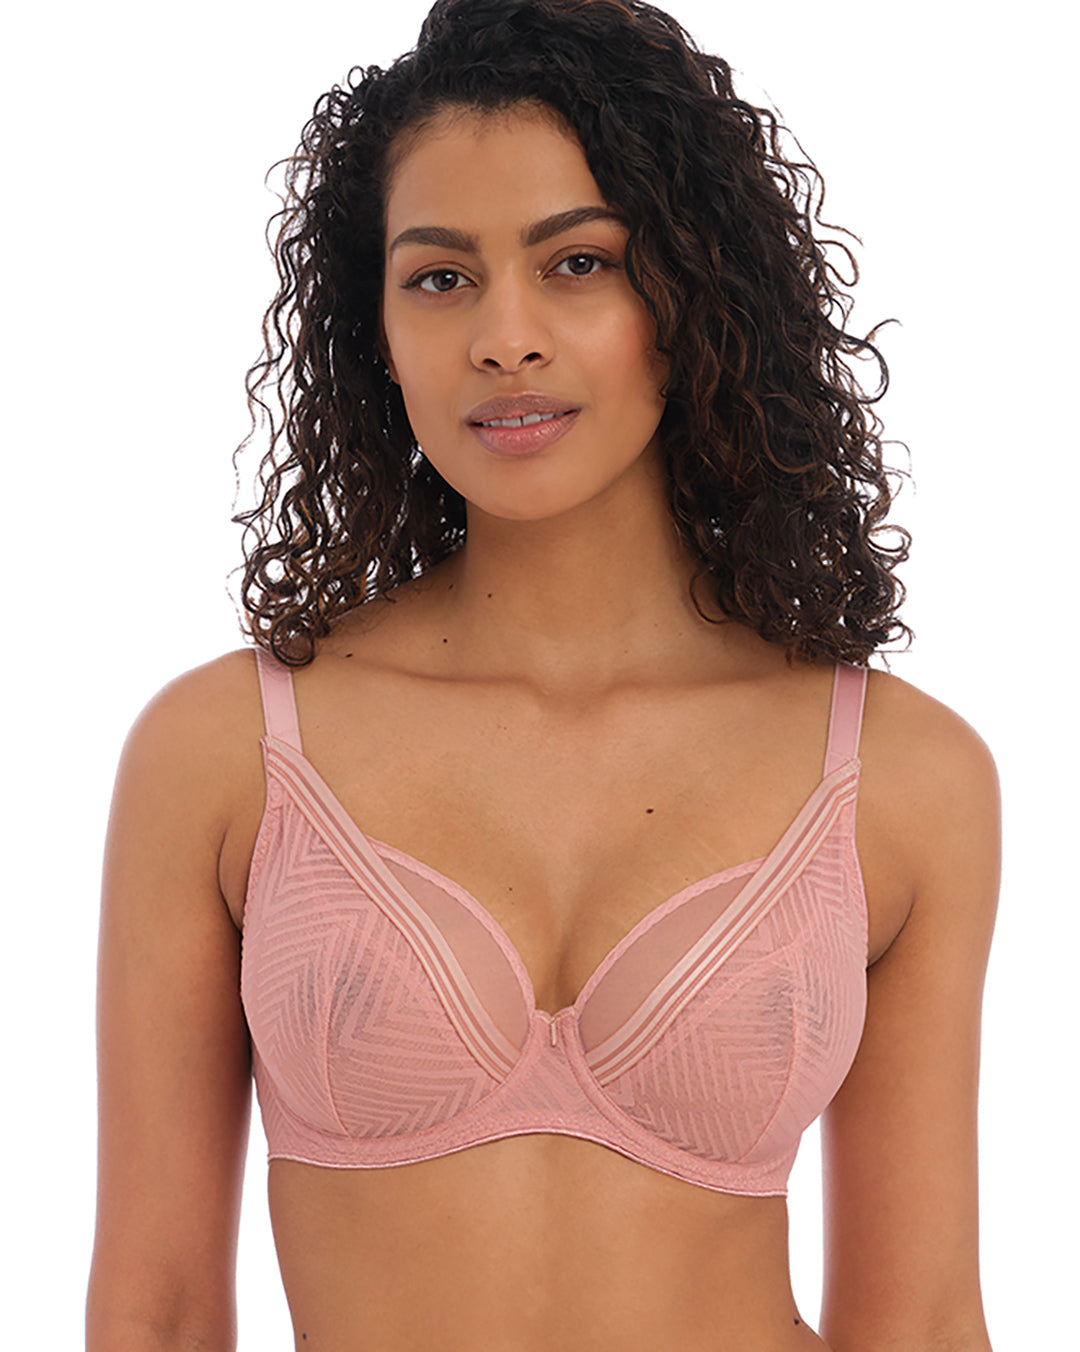 Freya Tailored Underwire Molded Plunge T-Shirt Bra in Ash Rose